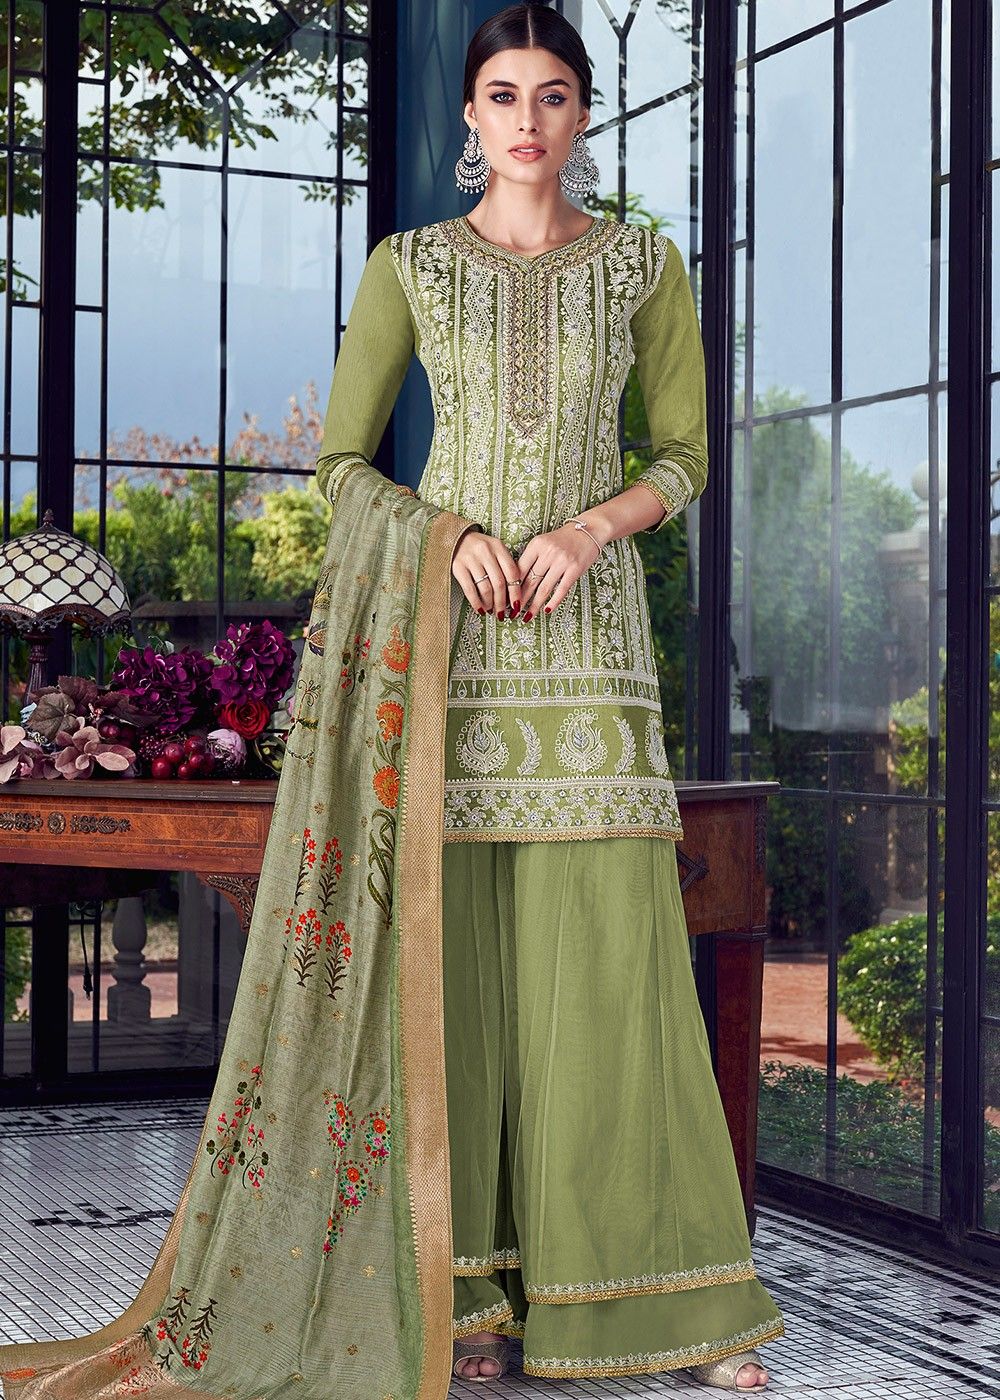 AANAYA VAANI VOL-23 INDIAN WOMEN HEAVY EMBROIDERY PARTY WEAR NET PAKISTANI  PANT SUIT at Rs 1395 | Pakistani Suits in Surat | ID: 25882075555